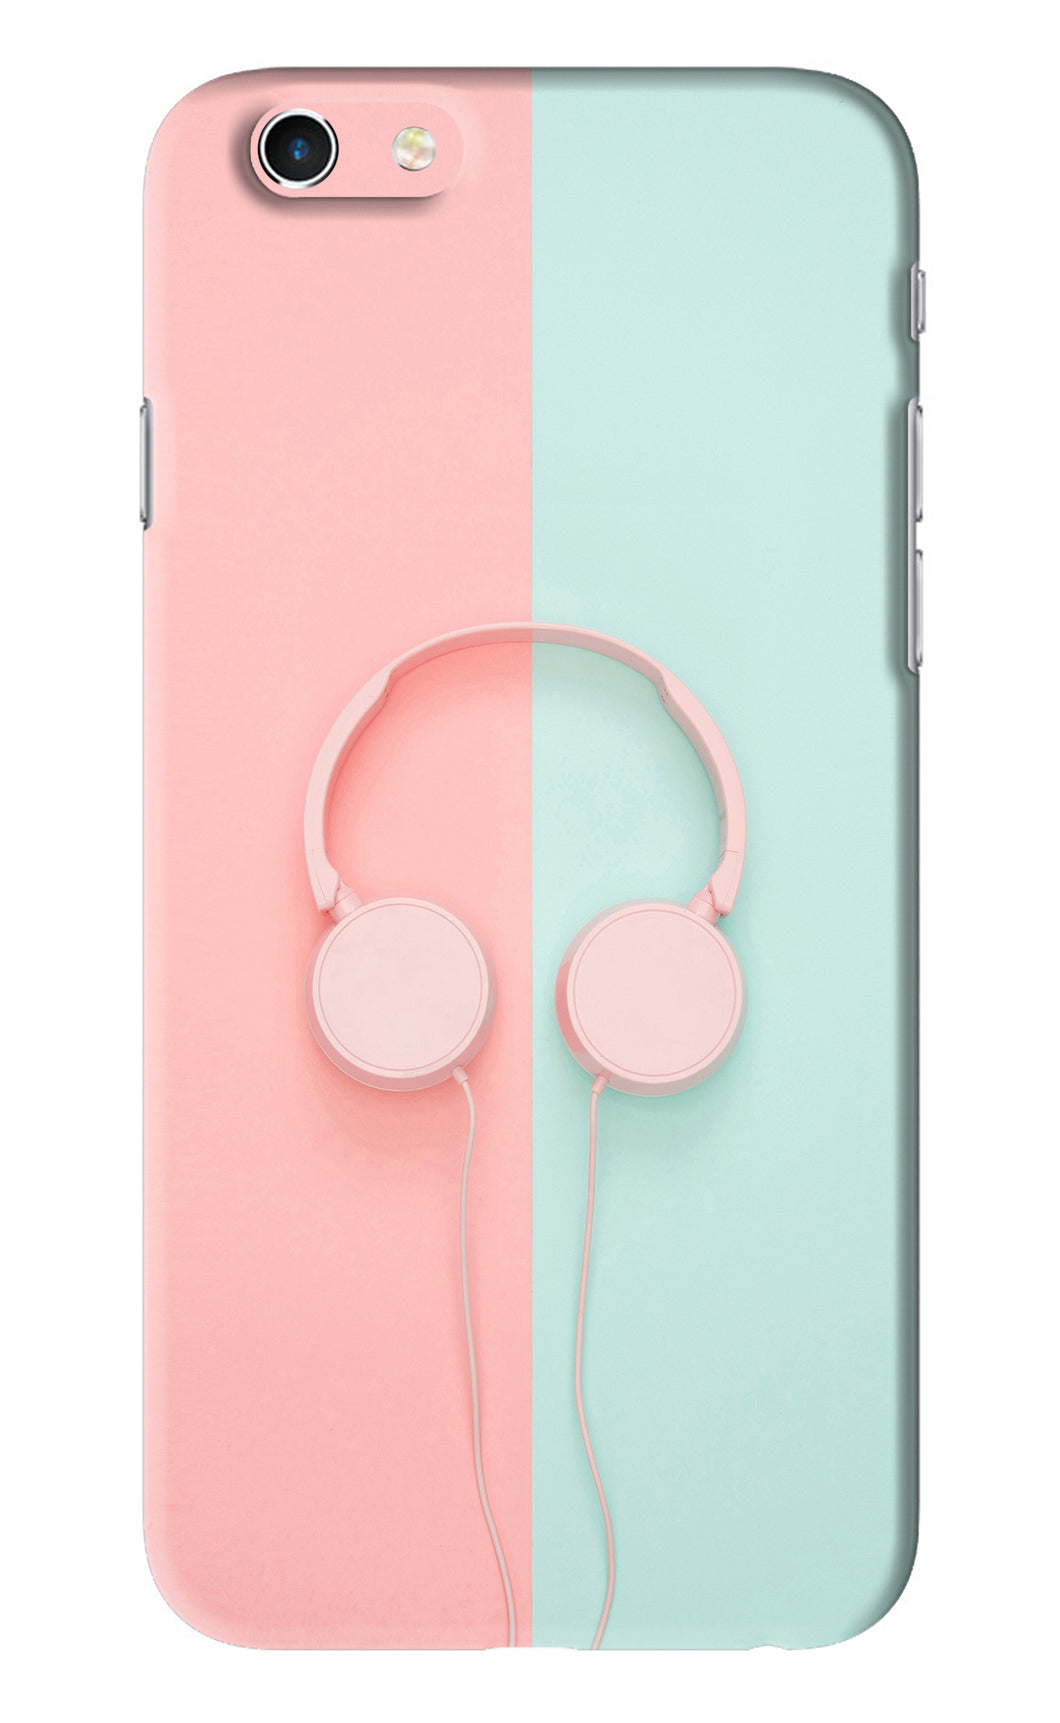 Music Lover iPhone 6 Back Skin Wrap